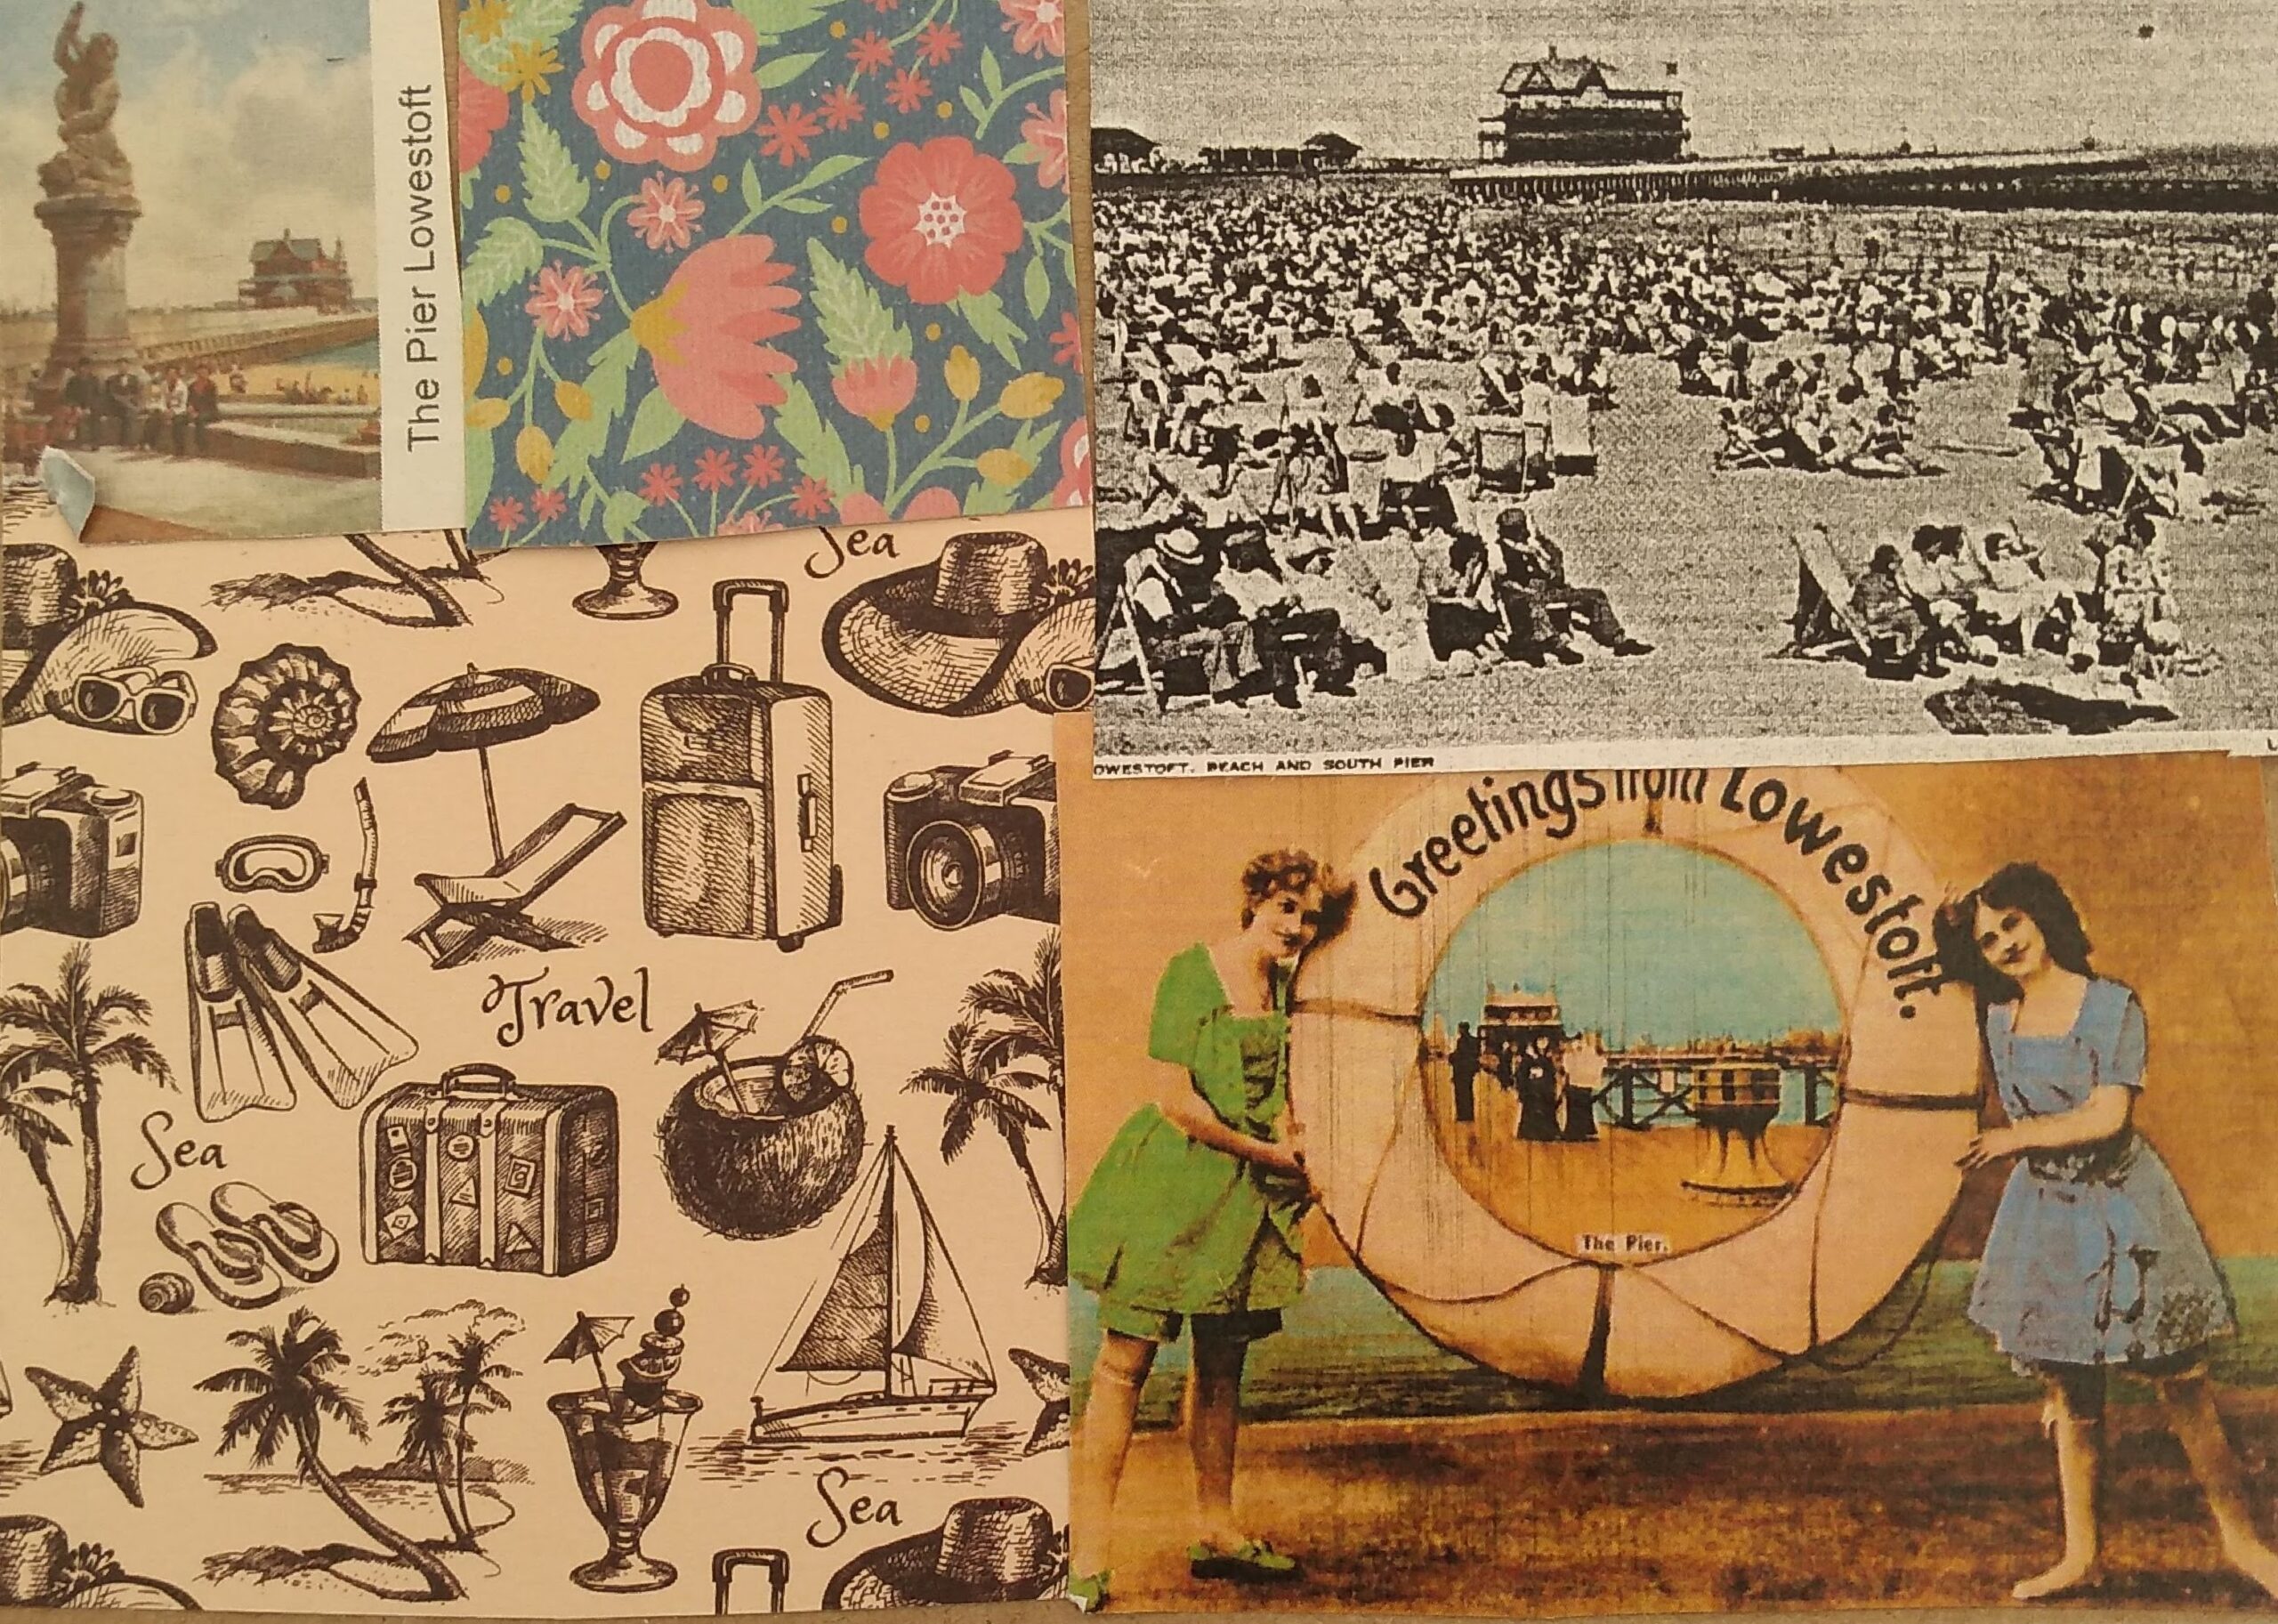 Collage paper with travel motifs such as suitcases, palm trees, flippers and snorkels fills the bottom left corner. To the right is an image from a vintage postcard showing two women in Victorian bathing costumes holding a life-saving buoy with the words Greetings from Lowestoft. Above, another vintage image of crowds of people seated in deckchairs on the beach with the pier in the background. Top left is a snippet of floral patterned paper and an image of the Titan statue by Lowestoft pier.